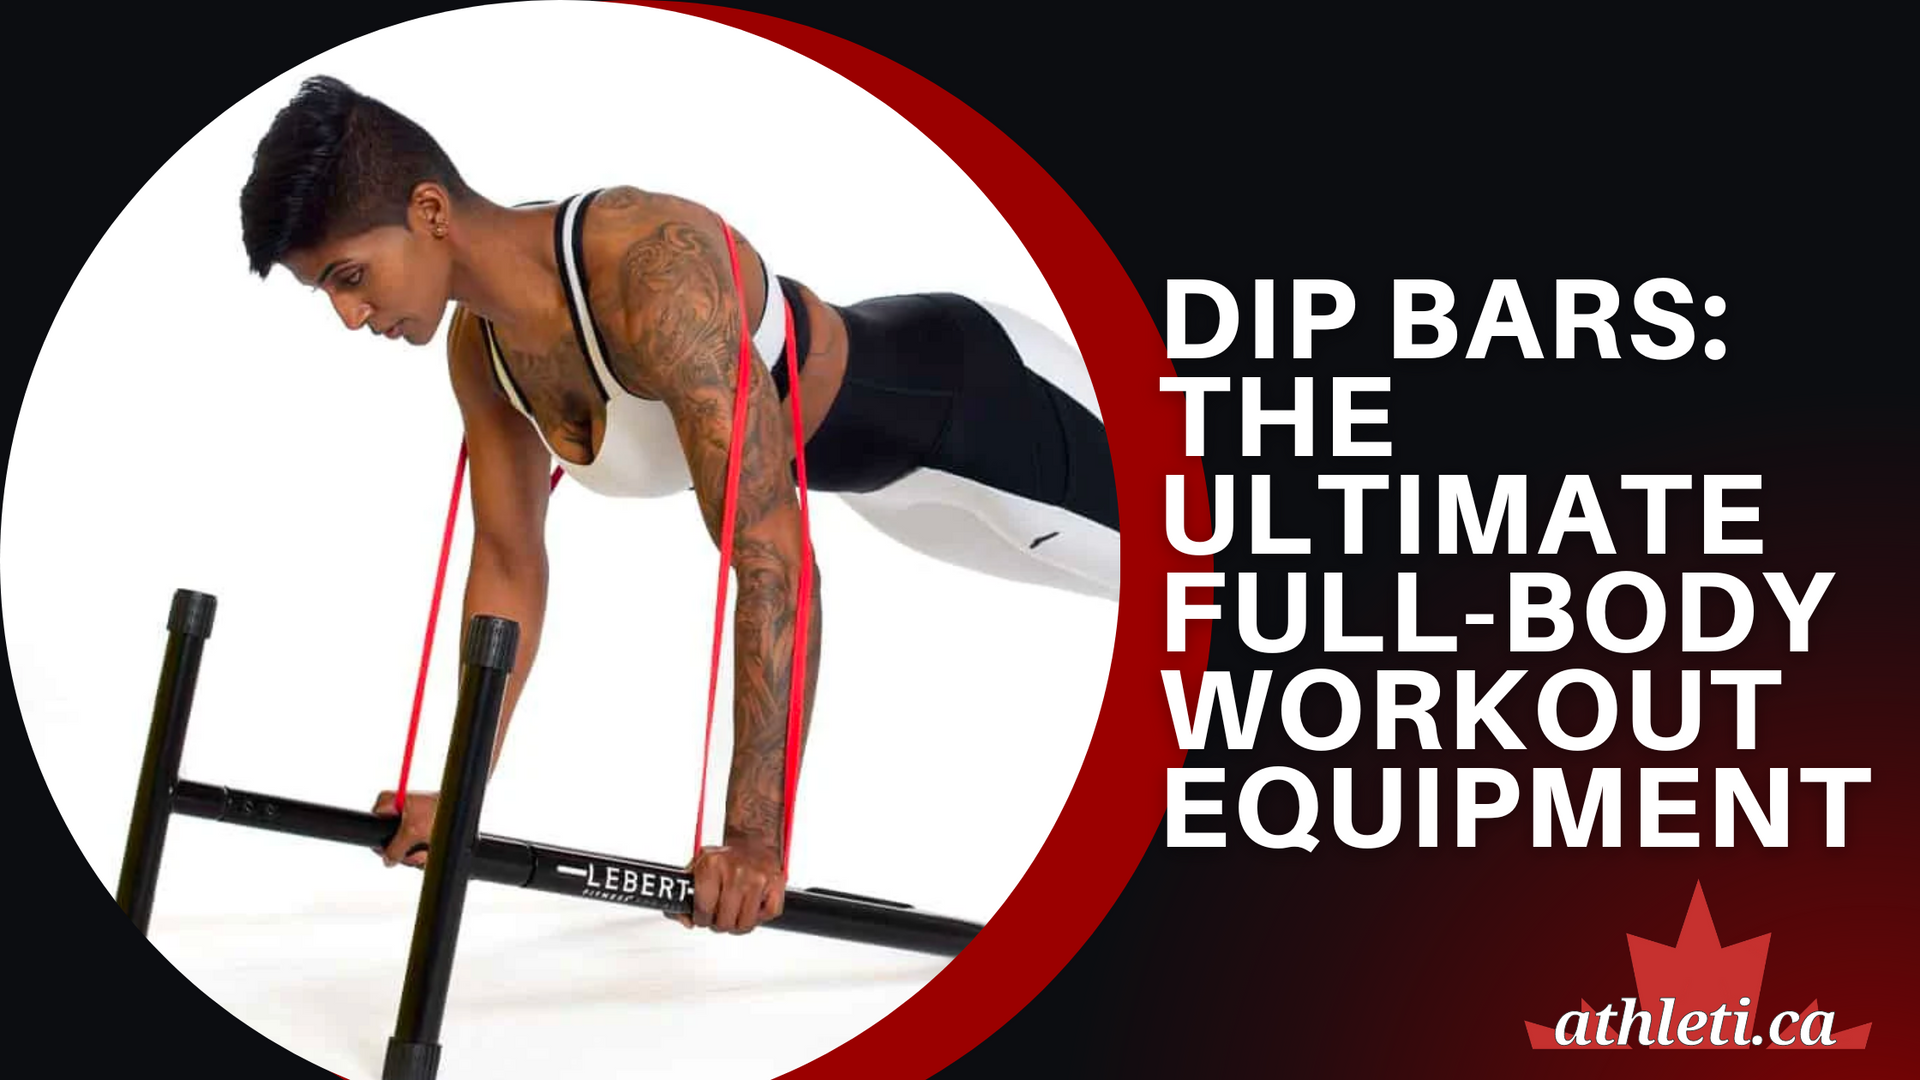 Get Fit and Strong with Dip Bars: The Ultimate Full-Body Workout Equipment